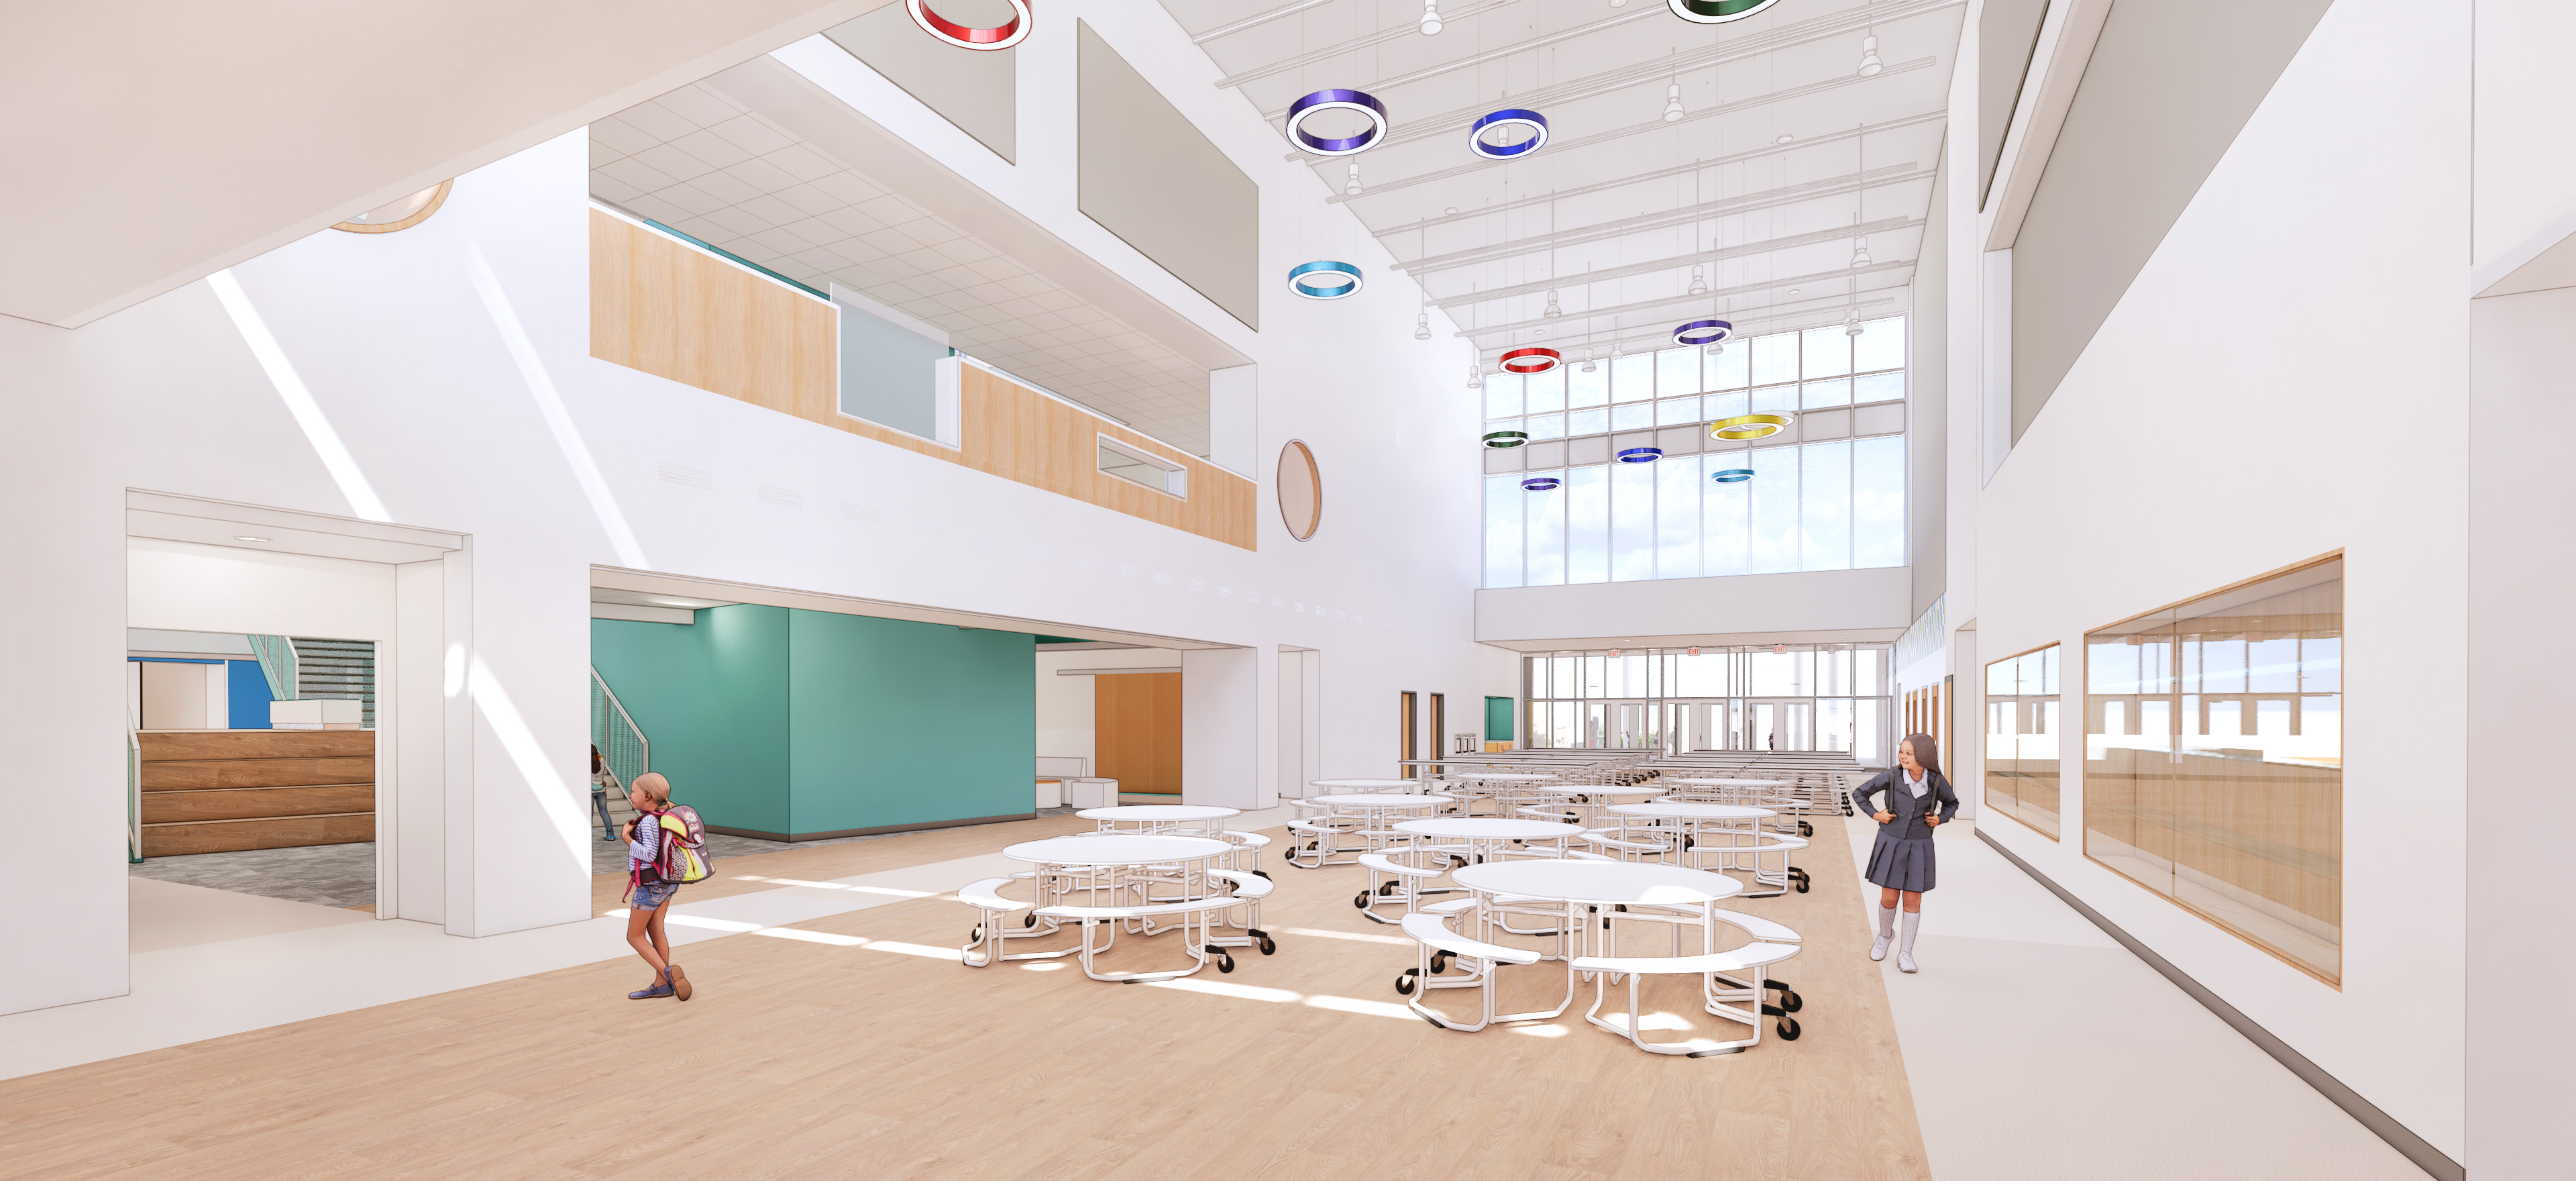 Draft rendering of new GES cafeteria, view from main entrance